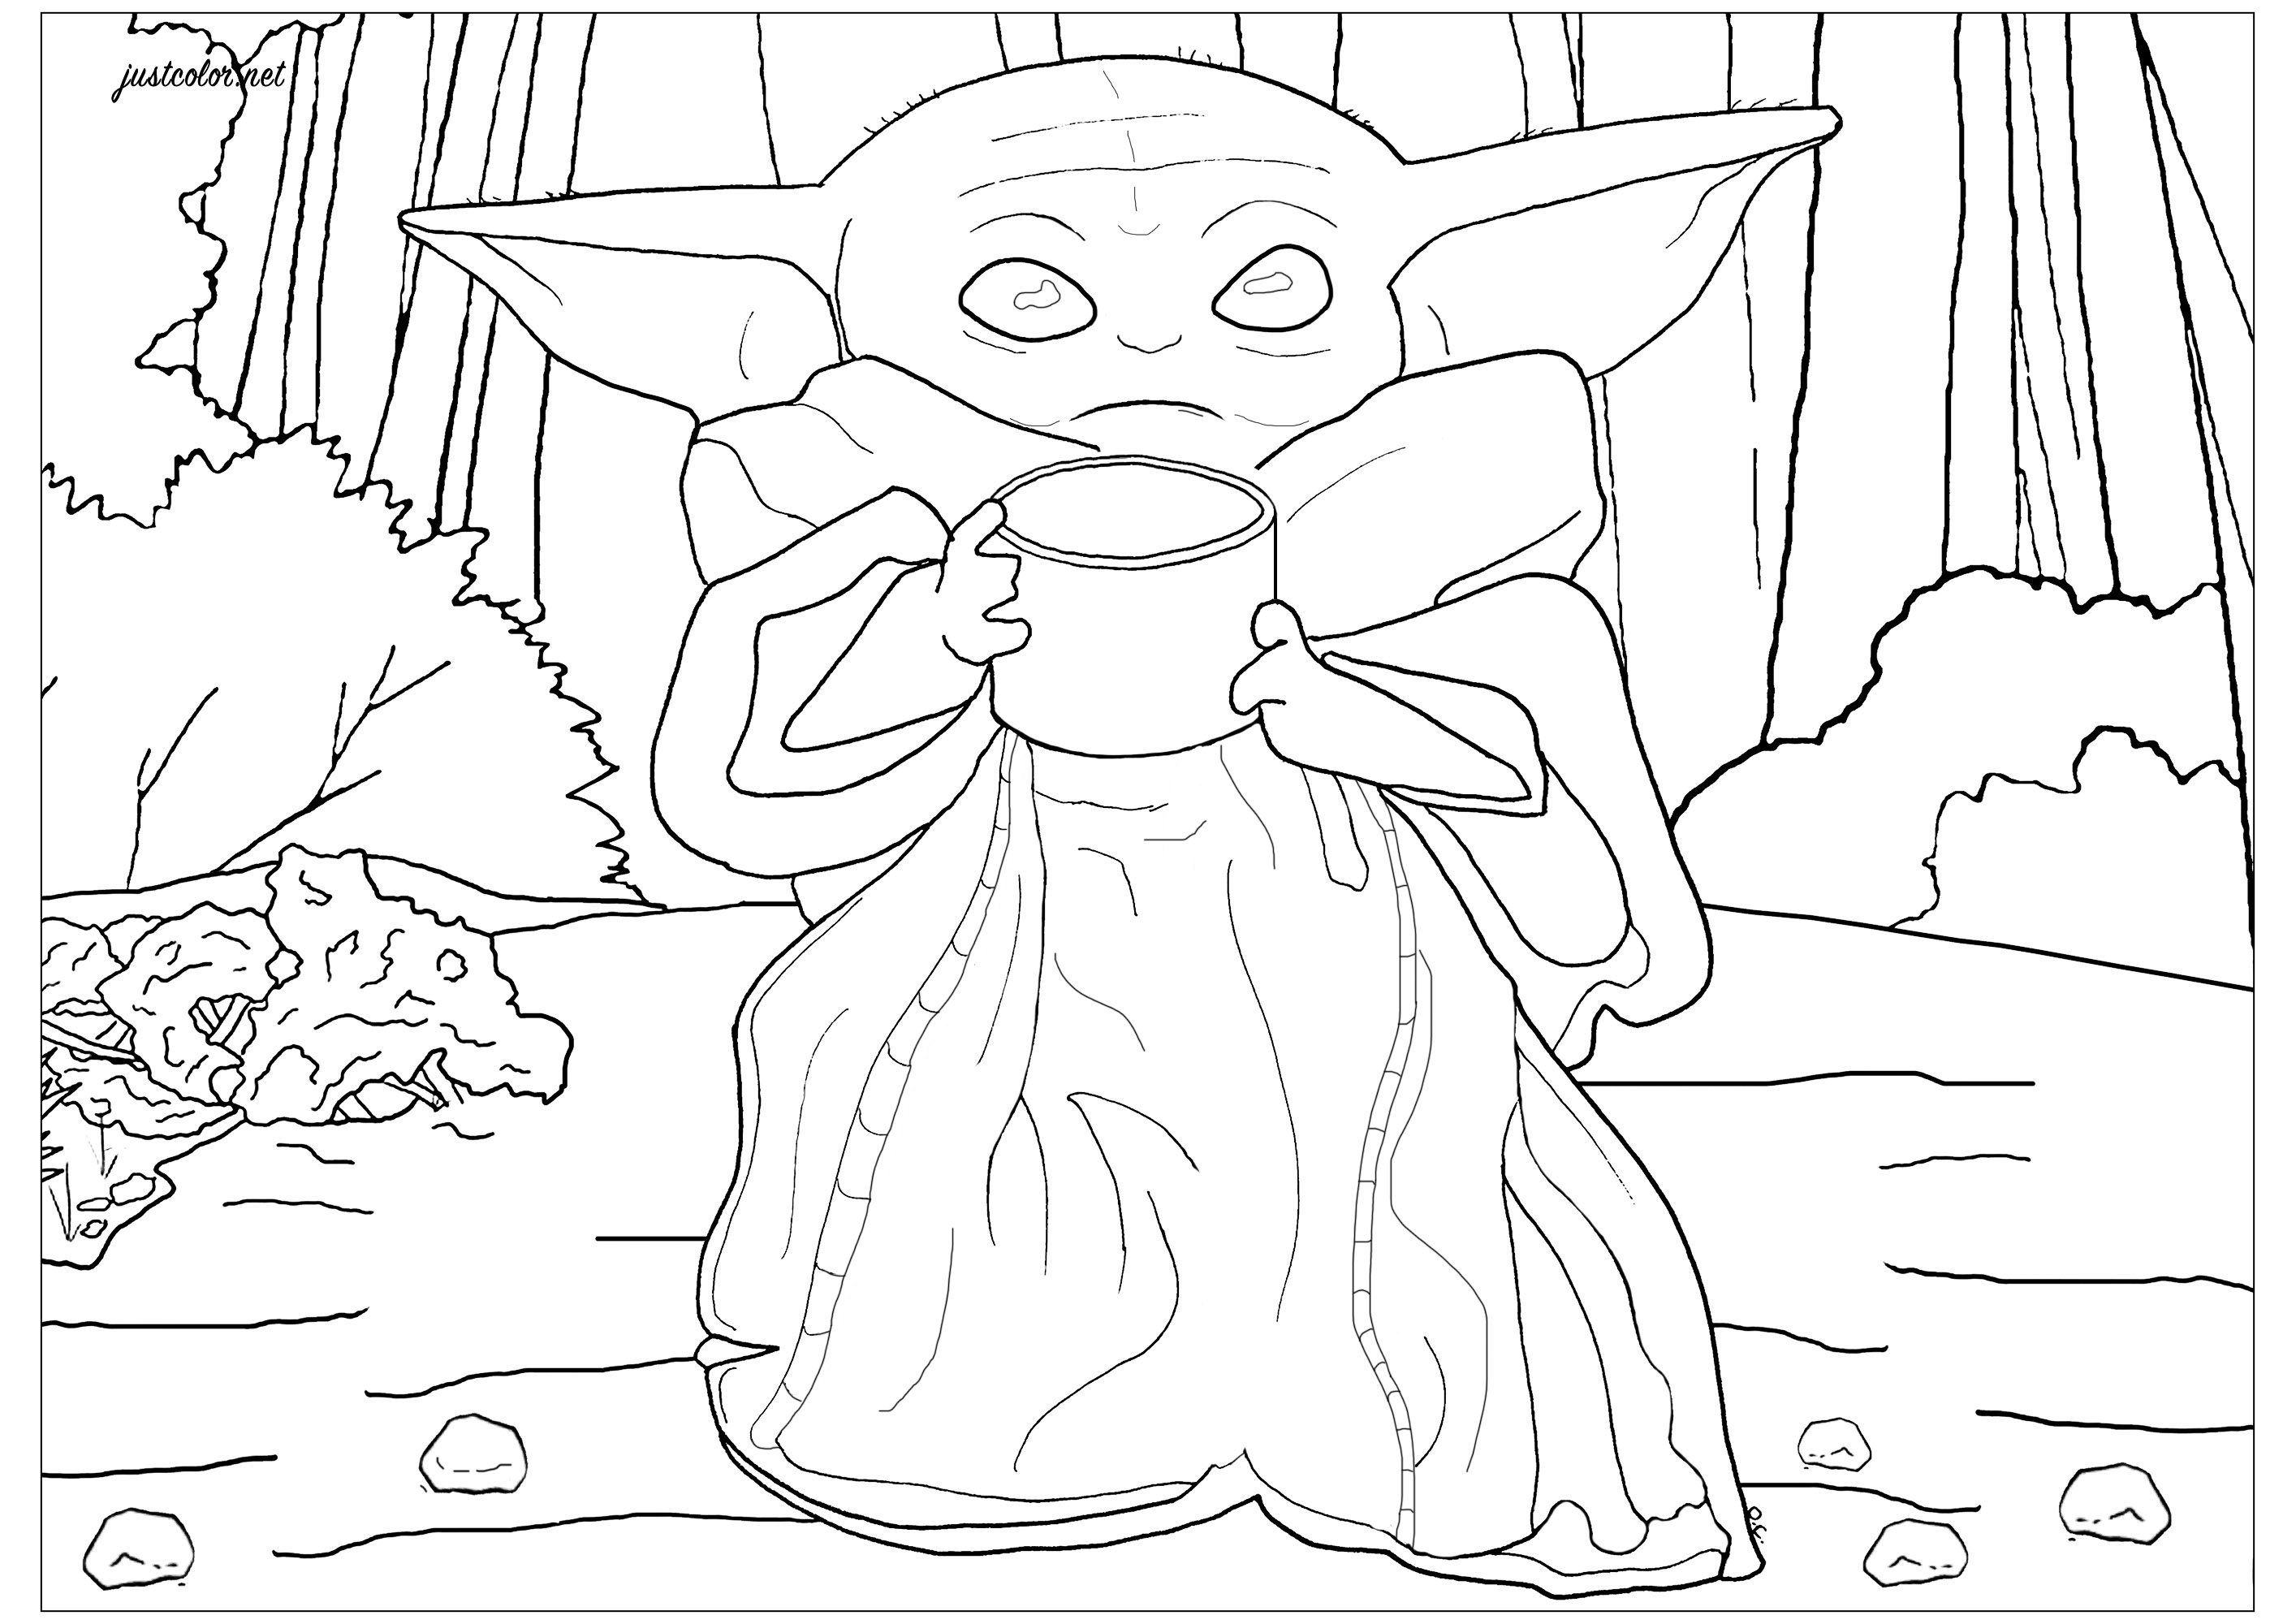 disney baby cartoon characters coloring pages